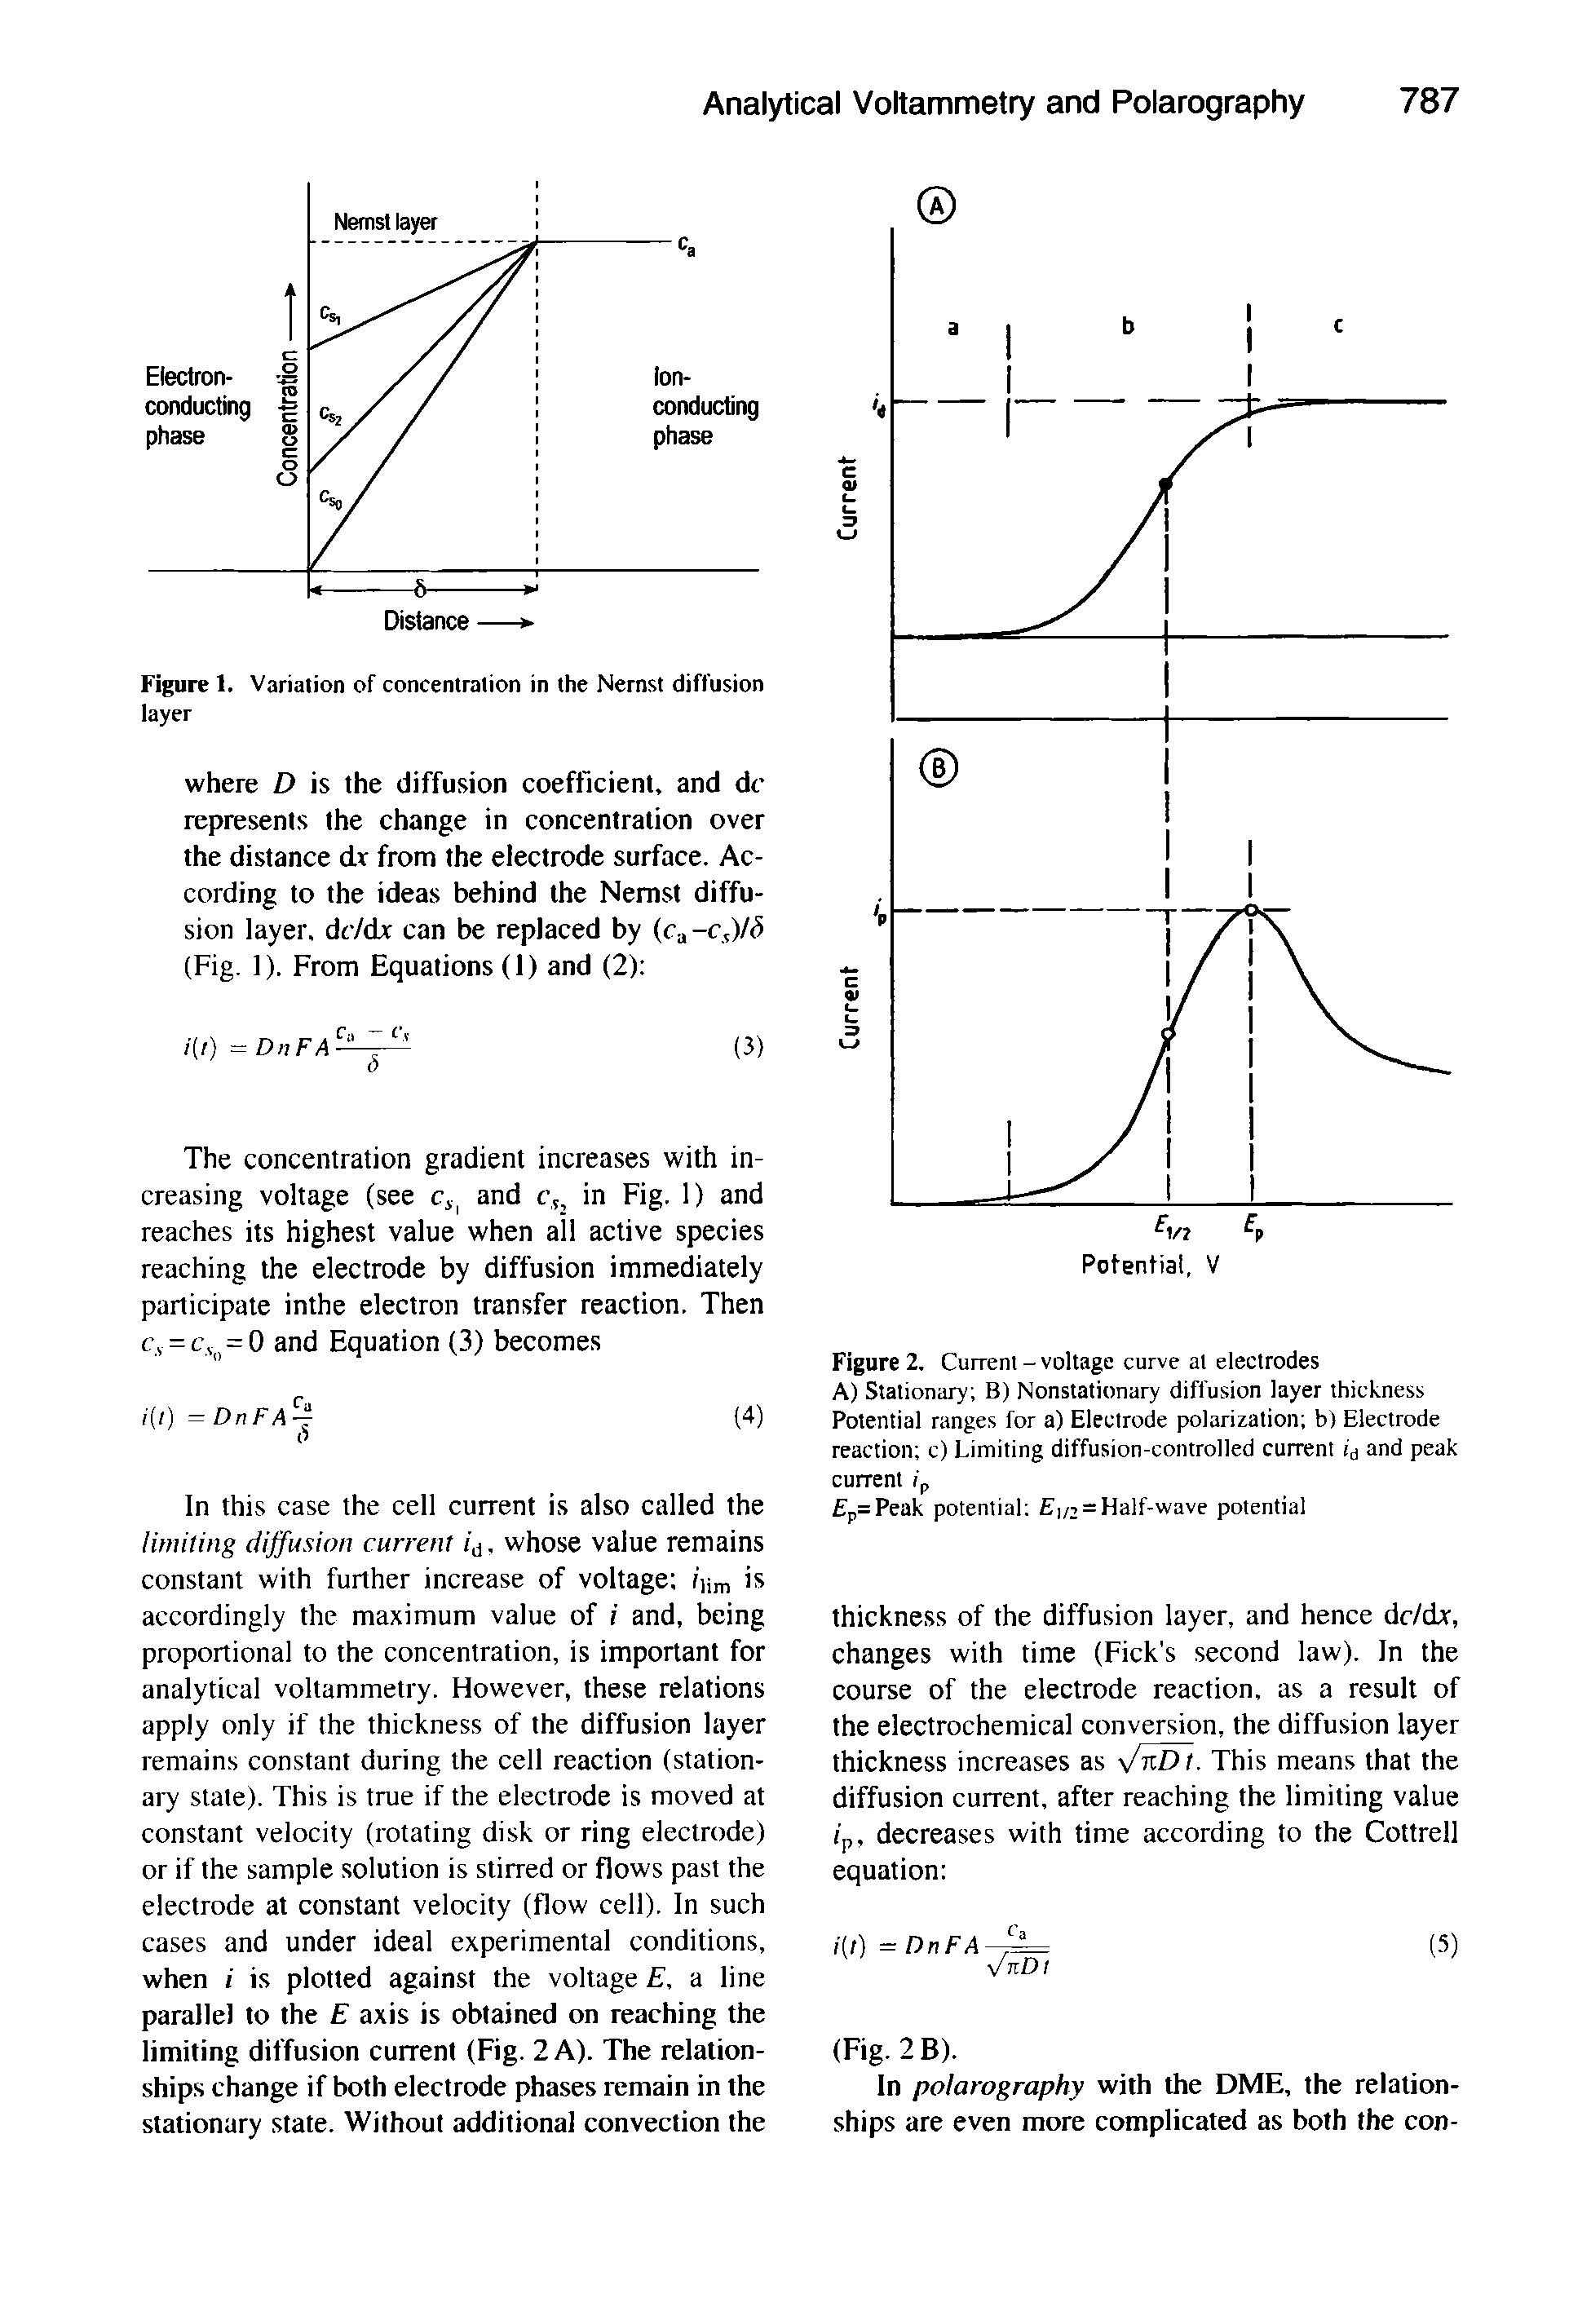 Figure 2. Currenl - voltage curve at electrodes A) Stationary B) Nonstationary diffusion layer thickness Potential ranges for a) Electrode polarization b) Electrode reaction c) Limiting diffusion-controlled current ia and peak current ip...